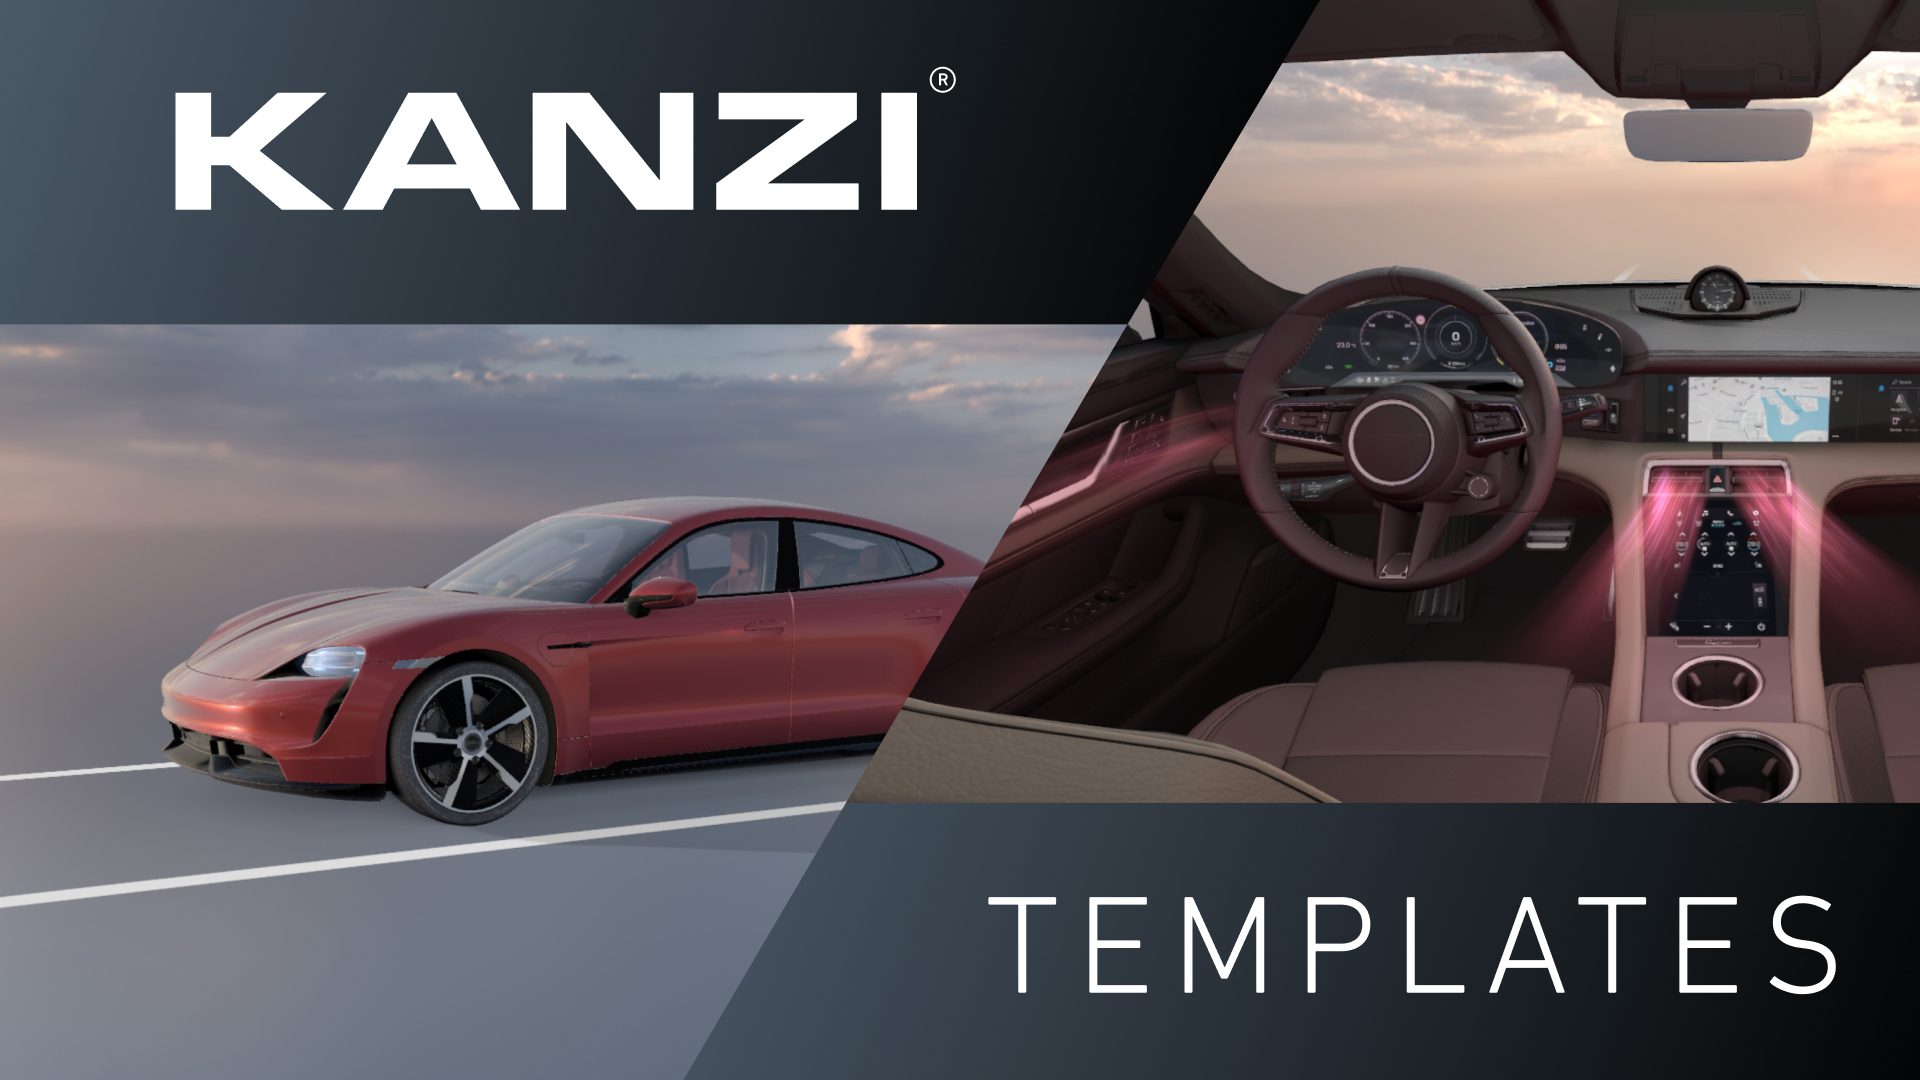 Kanzi Templates offering production ready models for automotive HMI projects